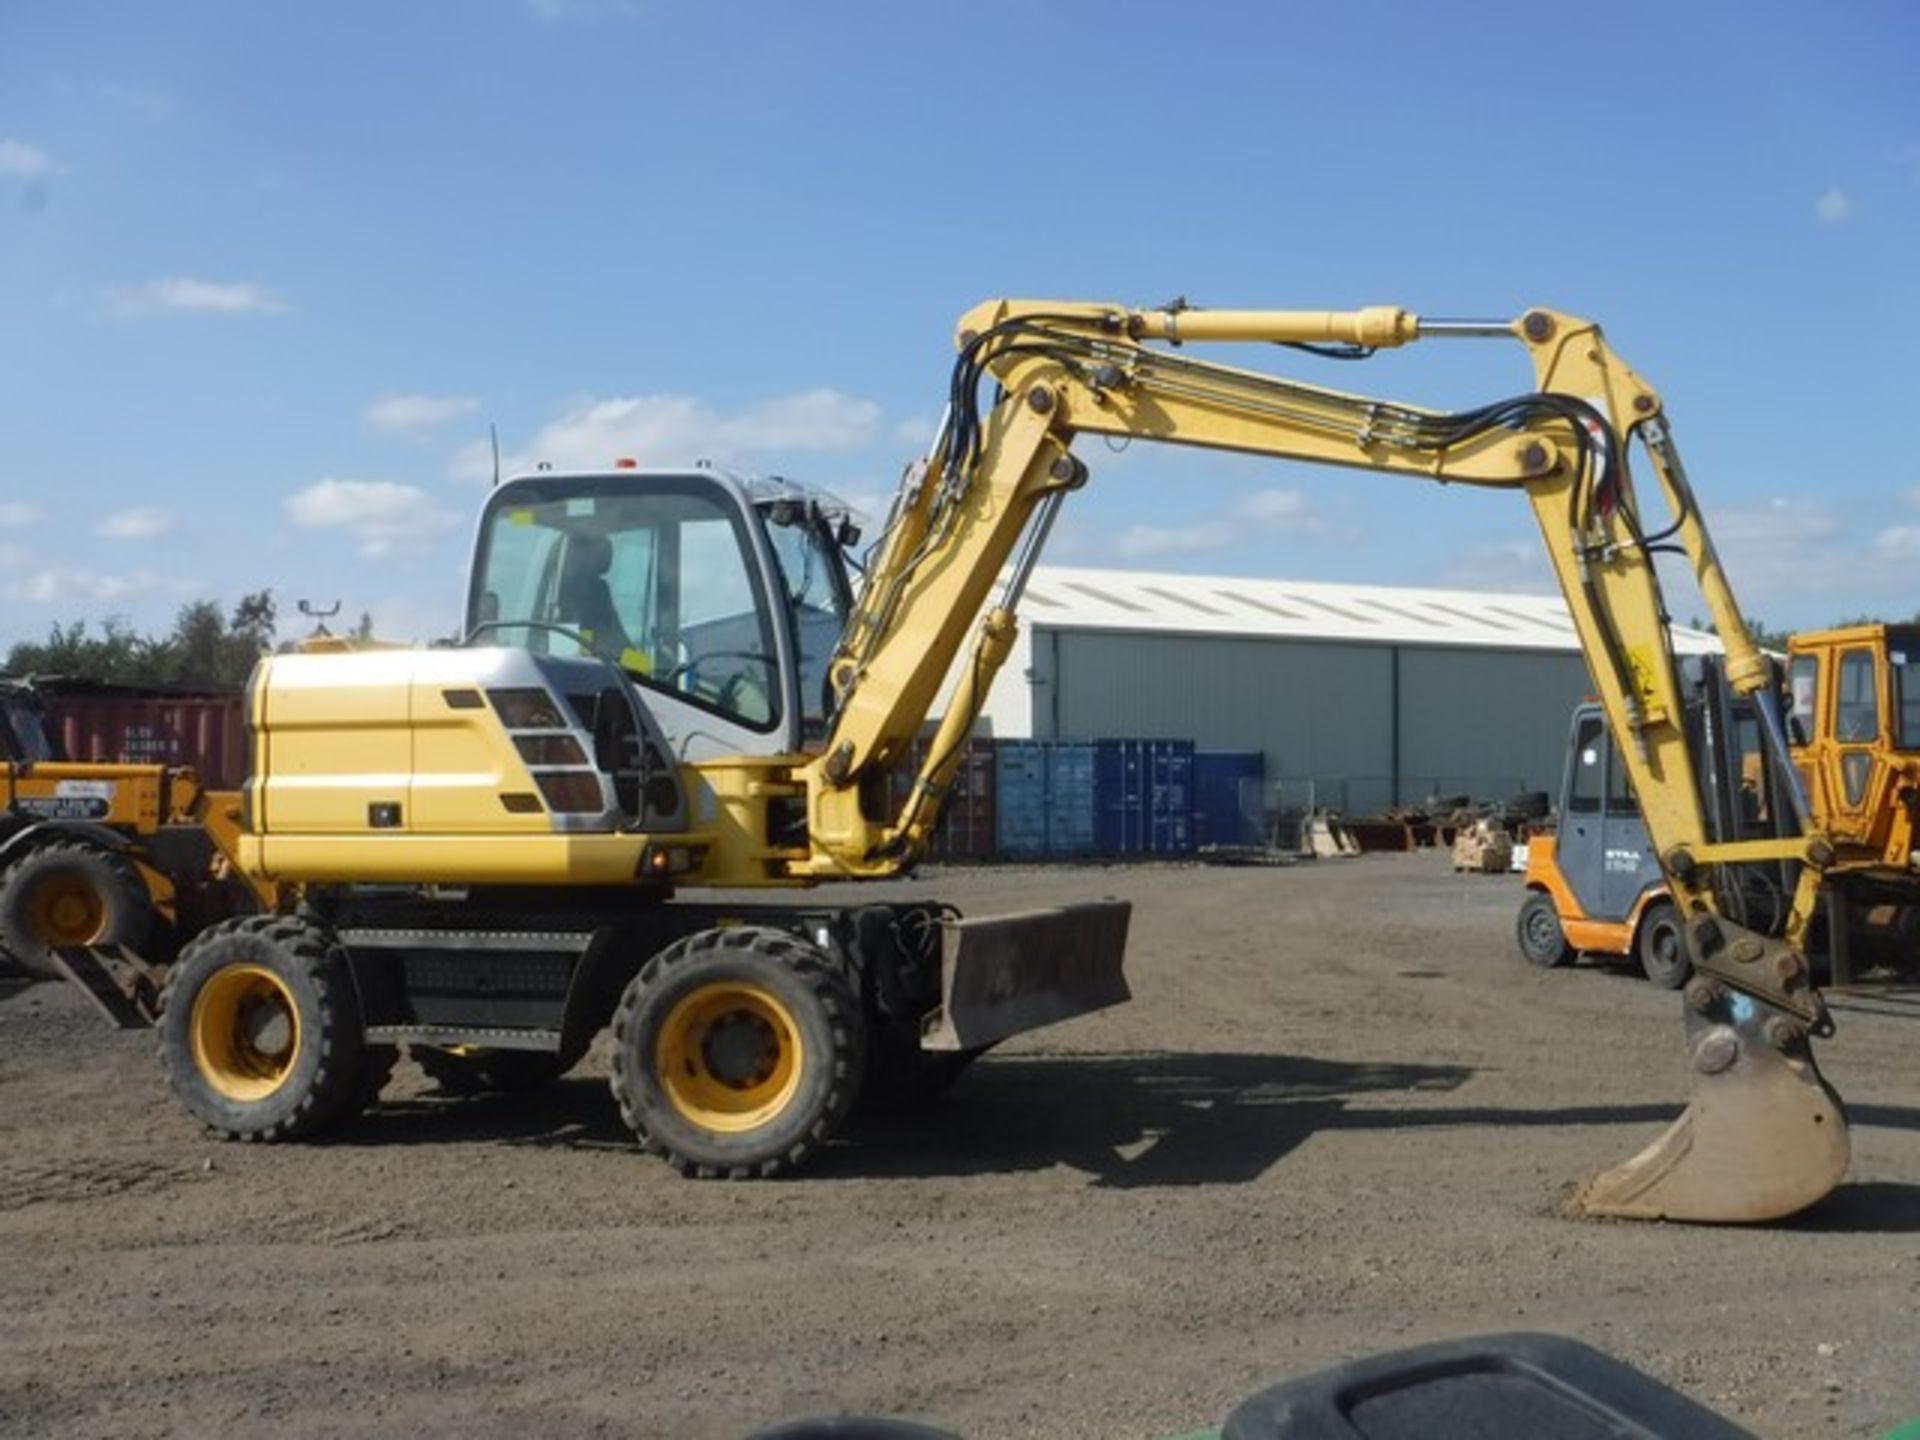 NEW HOLLAND 2008 10T WHEELED EXCAVATOR 12669HRS (NOT VERIFIED) C/W BLADE, HPW, HYDRAULIC QUICK HITC